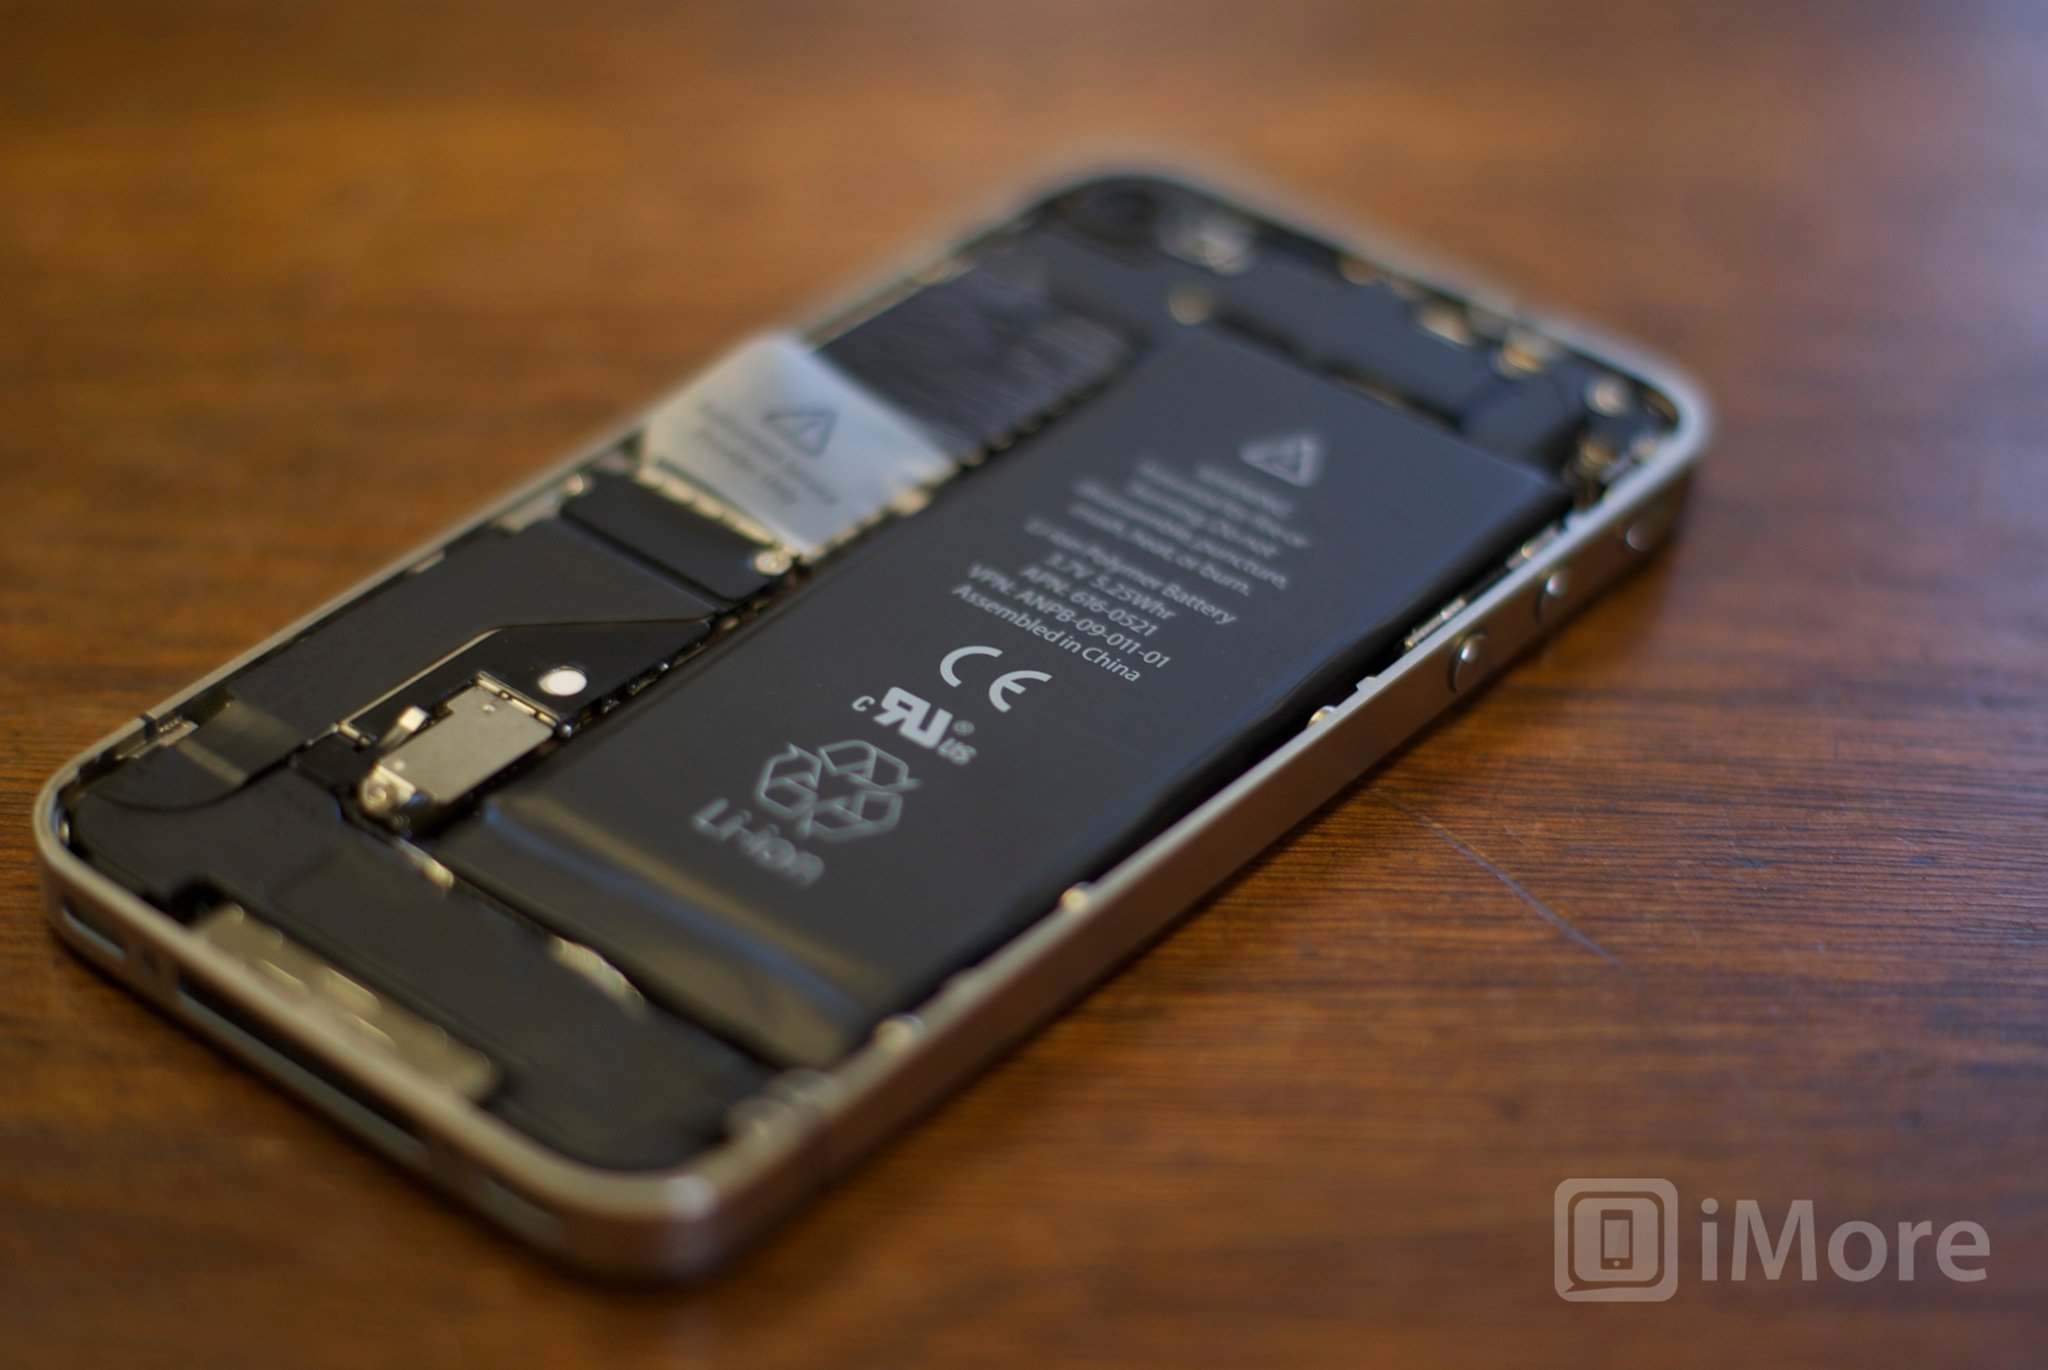 How to replace the rear camera in an iPhone 4